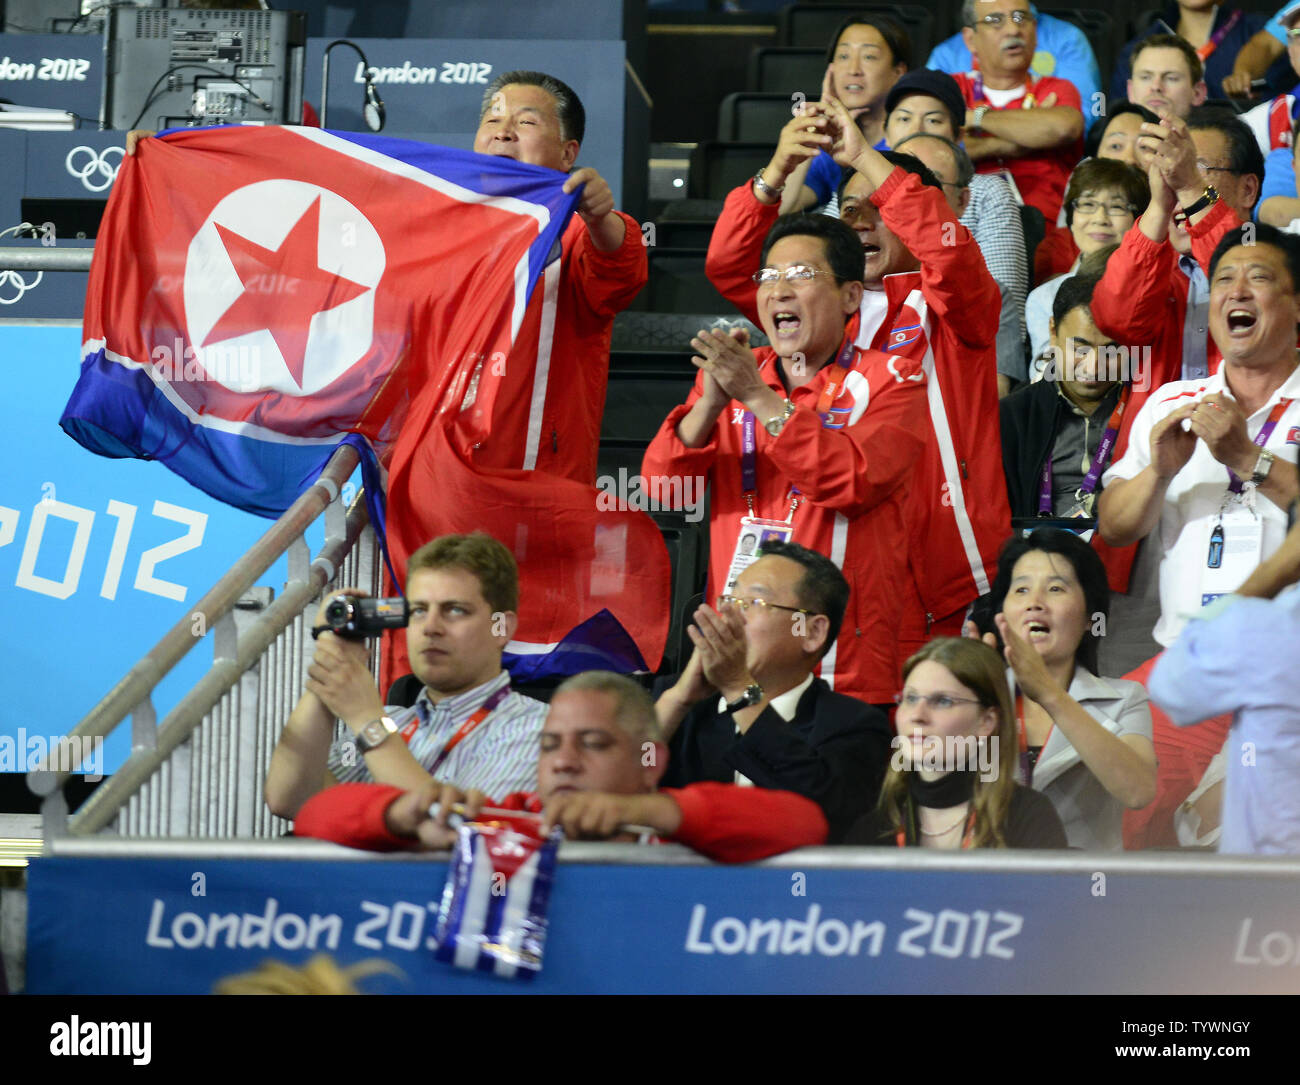 Members of the Peoples Republic of Korea (North Korea) team celebrate Kum Ae An's victory over Yanet Bermoy Acosta of Cuba in the Women's Judo 52kg Gold Medal match at the London 2012 Summer Olympic Games on July 29, 2012 in London. UPI/Ron Sachs Stock Photo